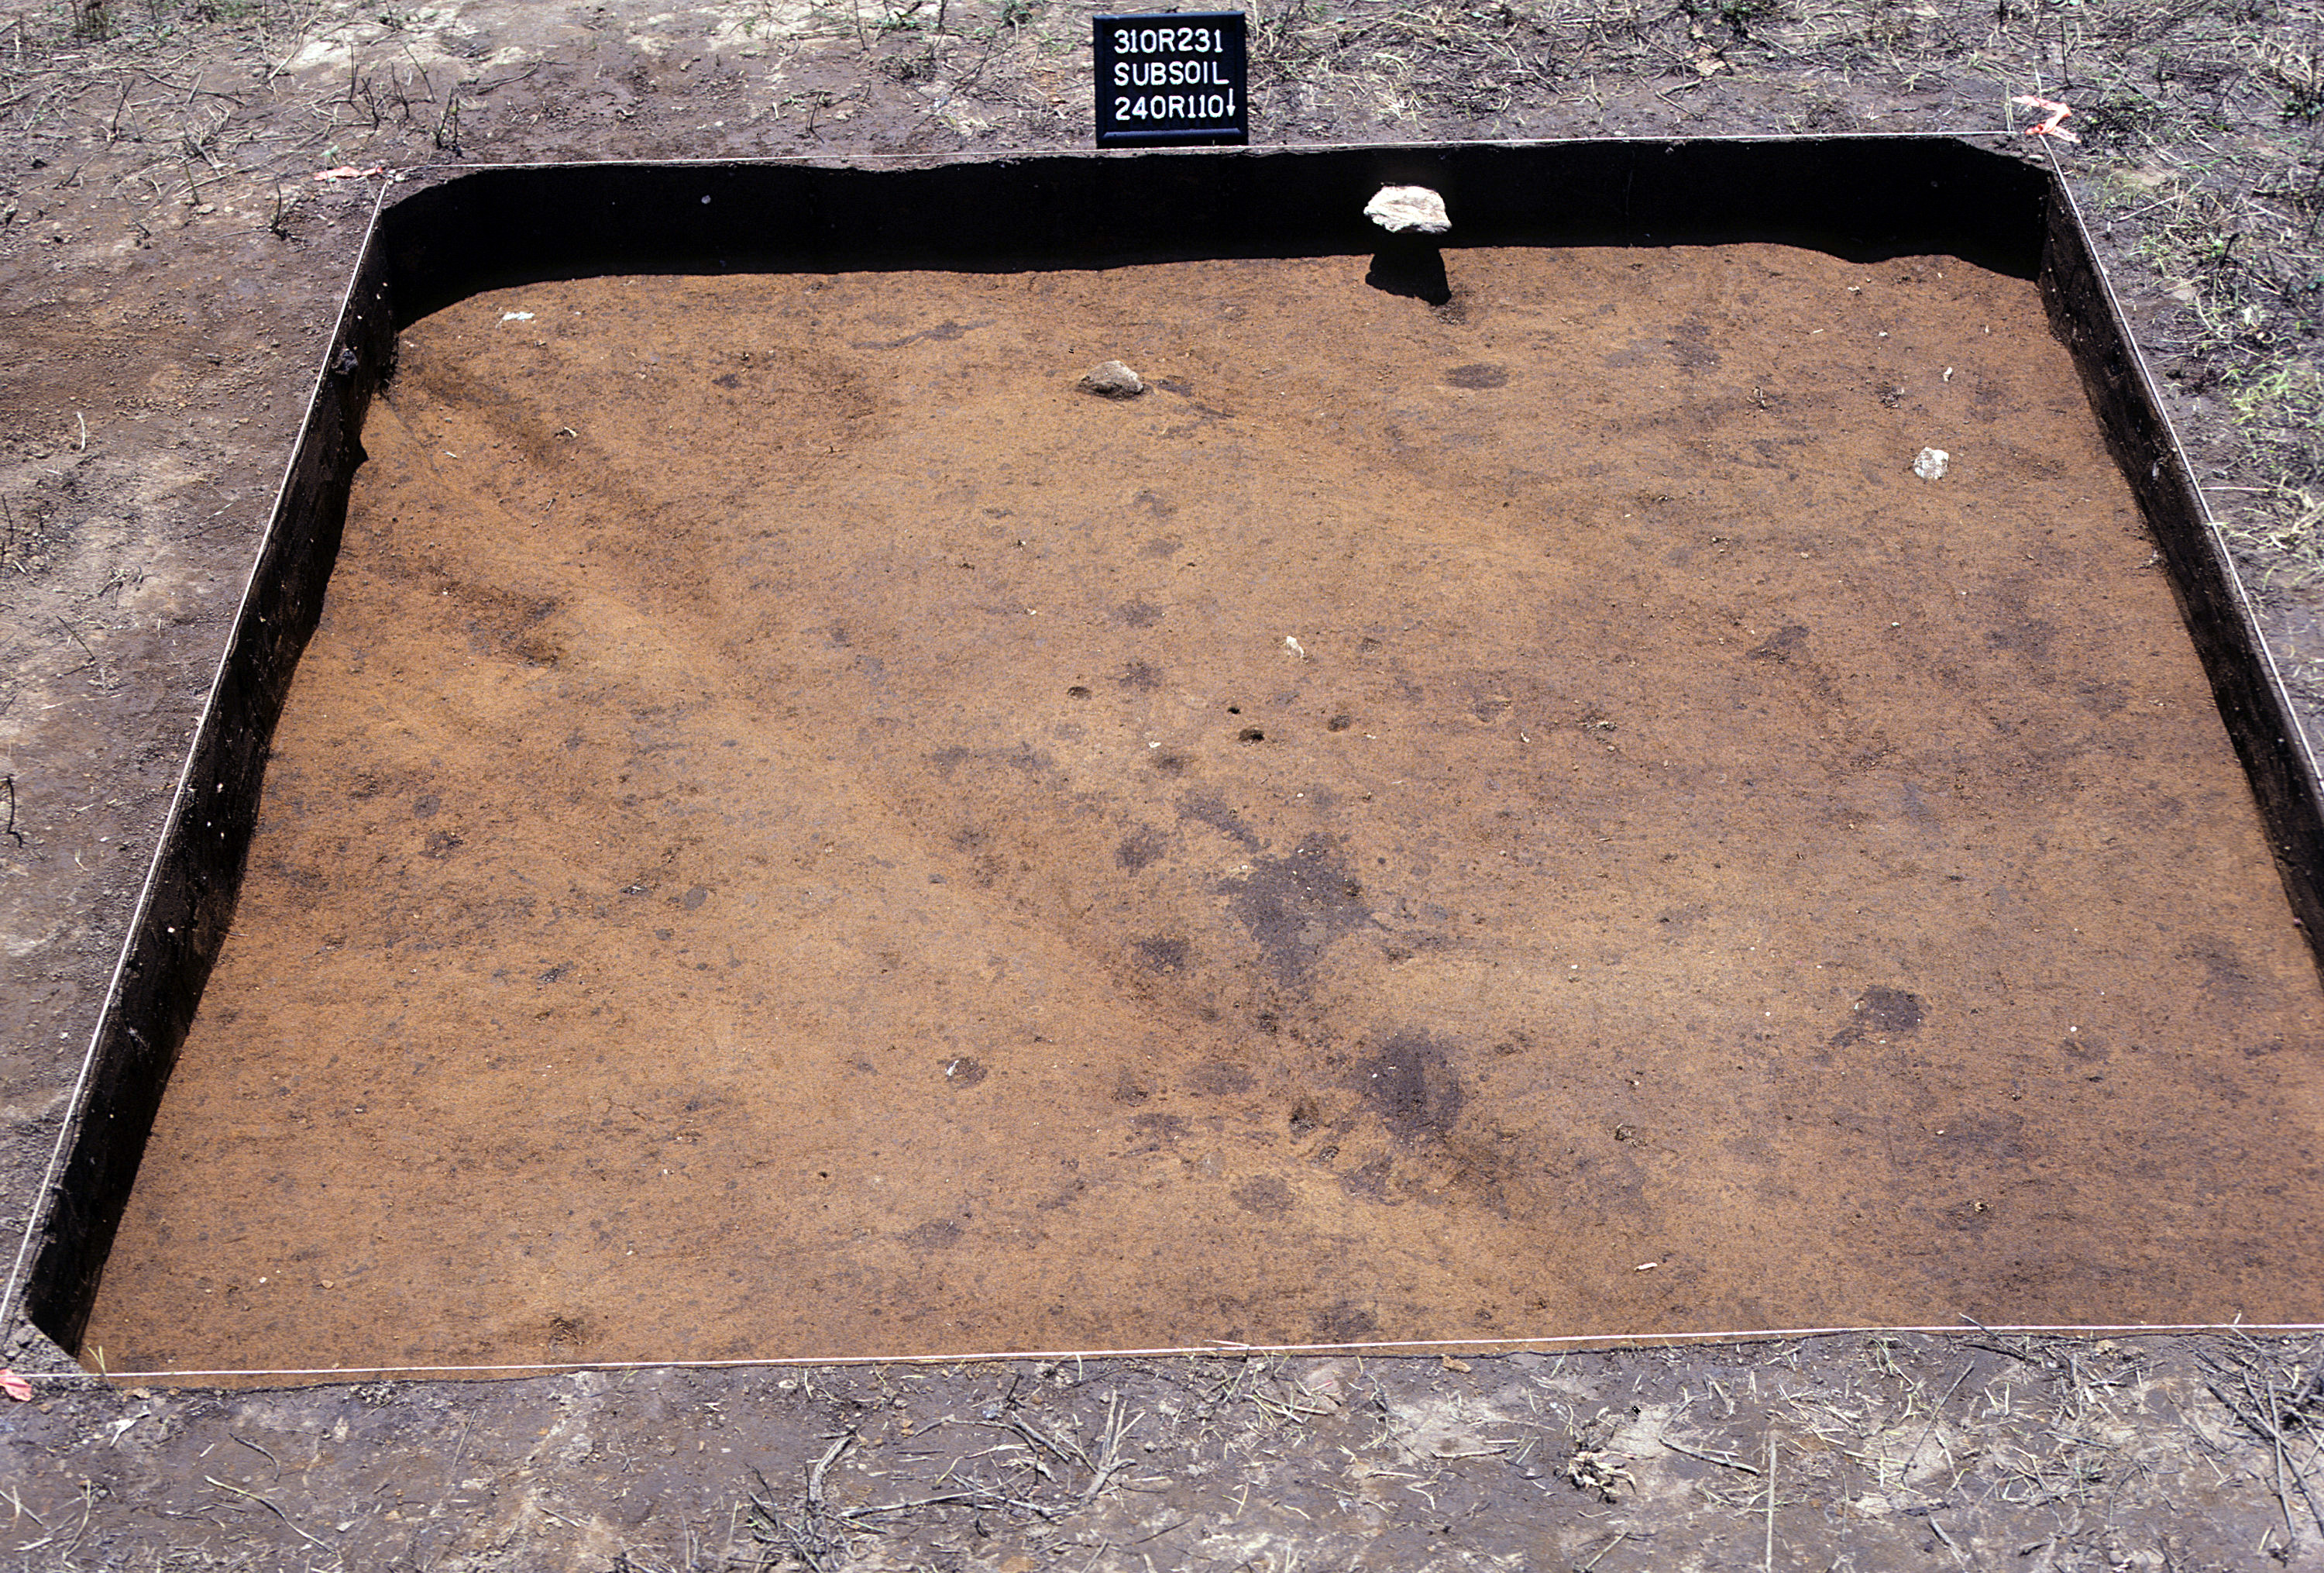 Figure 849. Sq. 240R110 at top of subsoil (view to south).